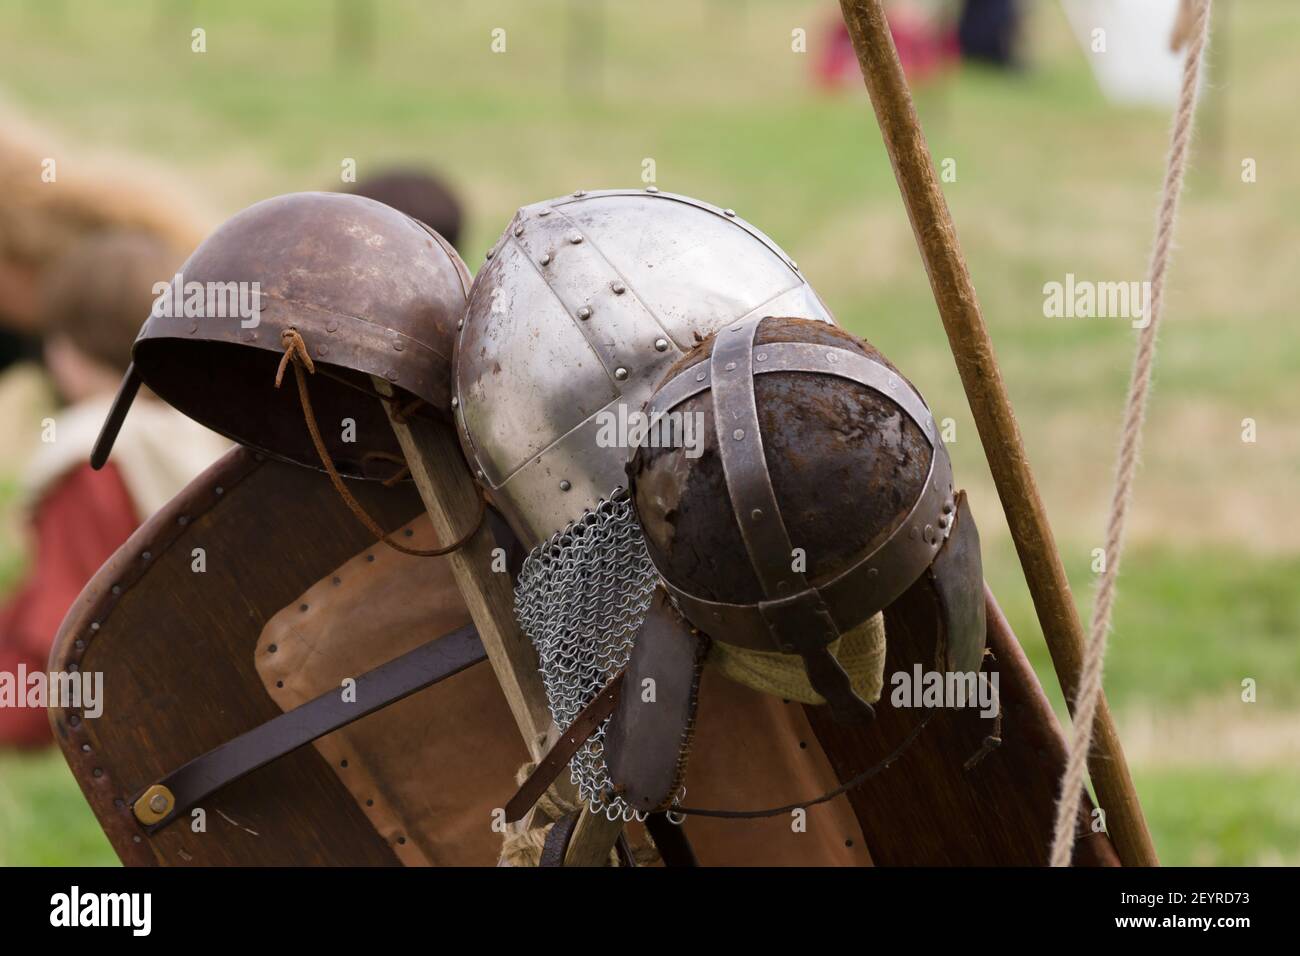 Early medieval spangenhelm or leather and steel skull cap with metal reinforcements in a re-enactment camp Stock Photo